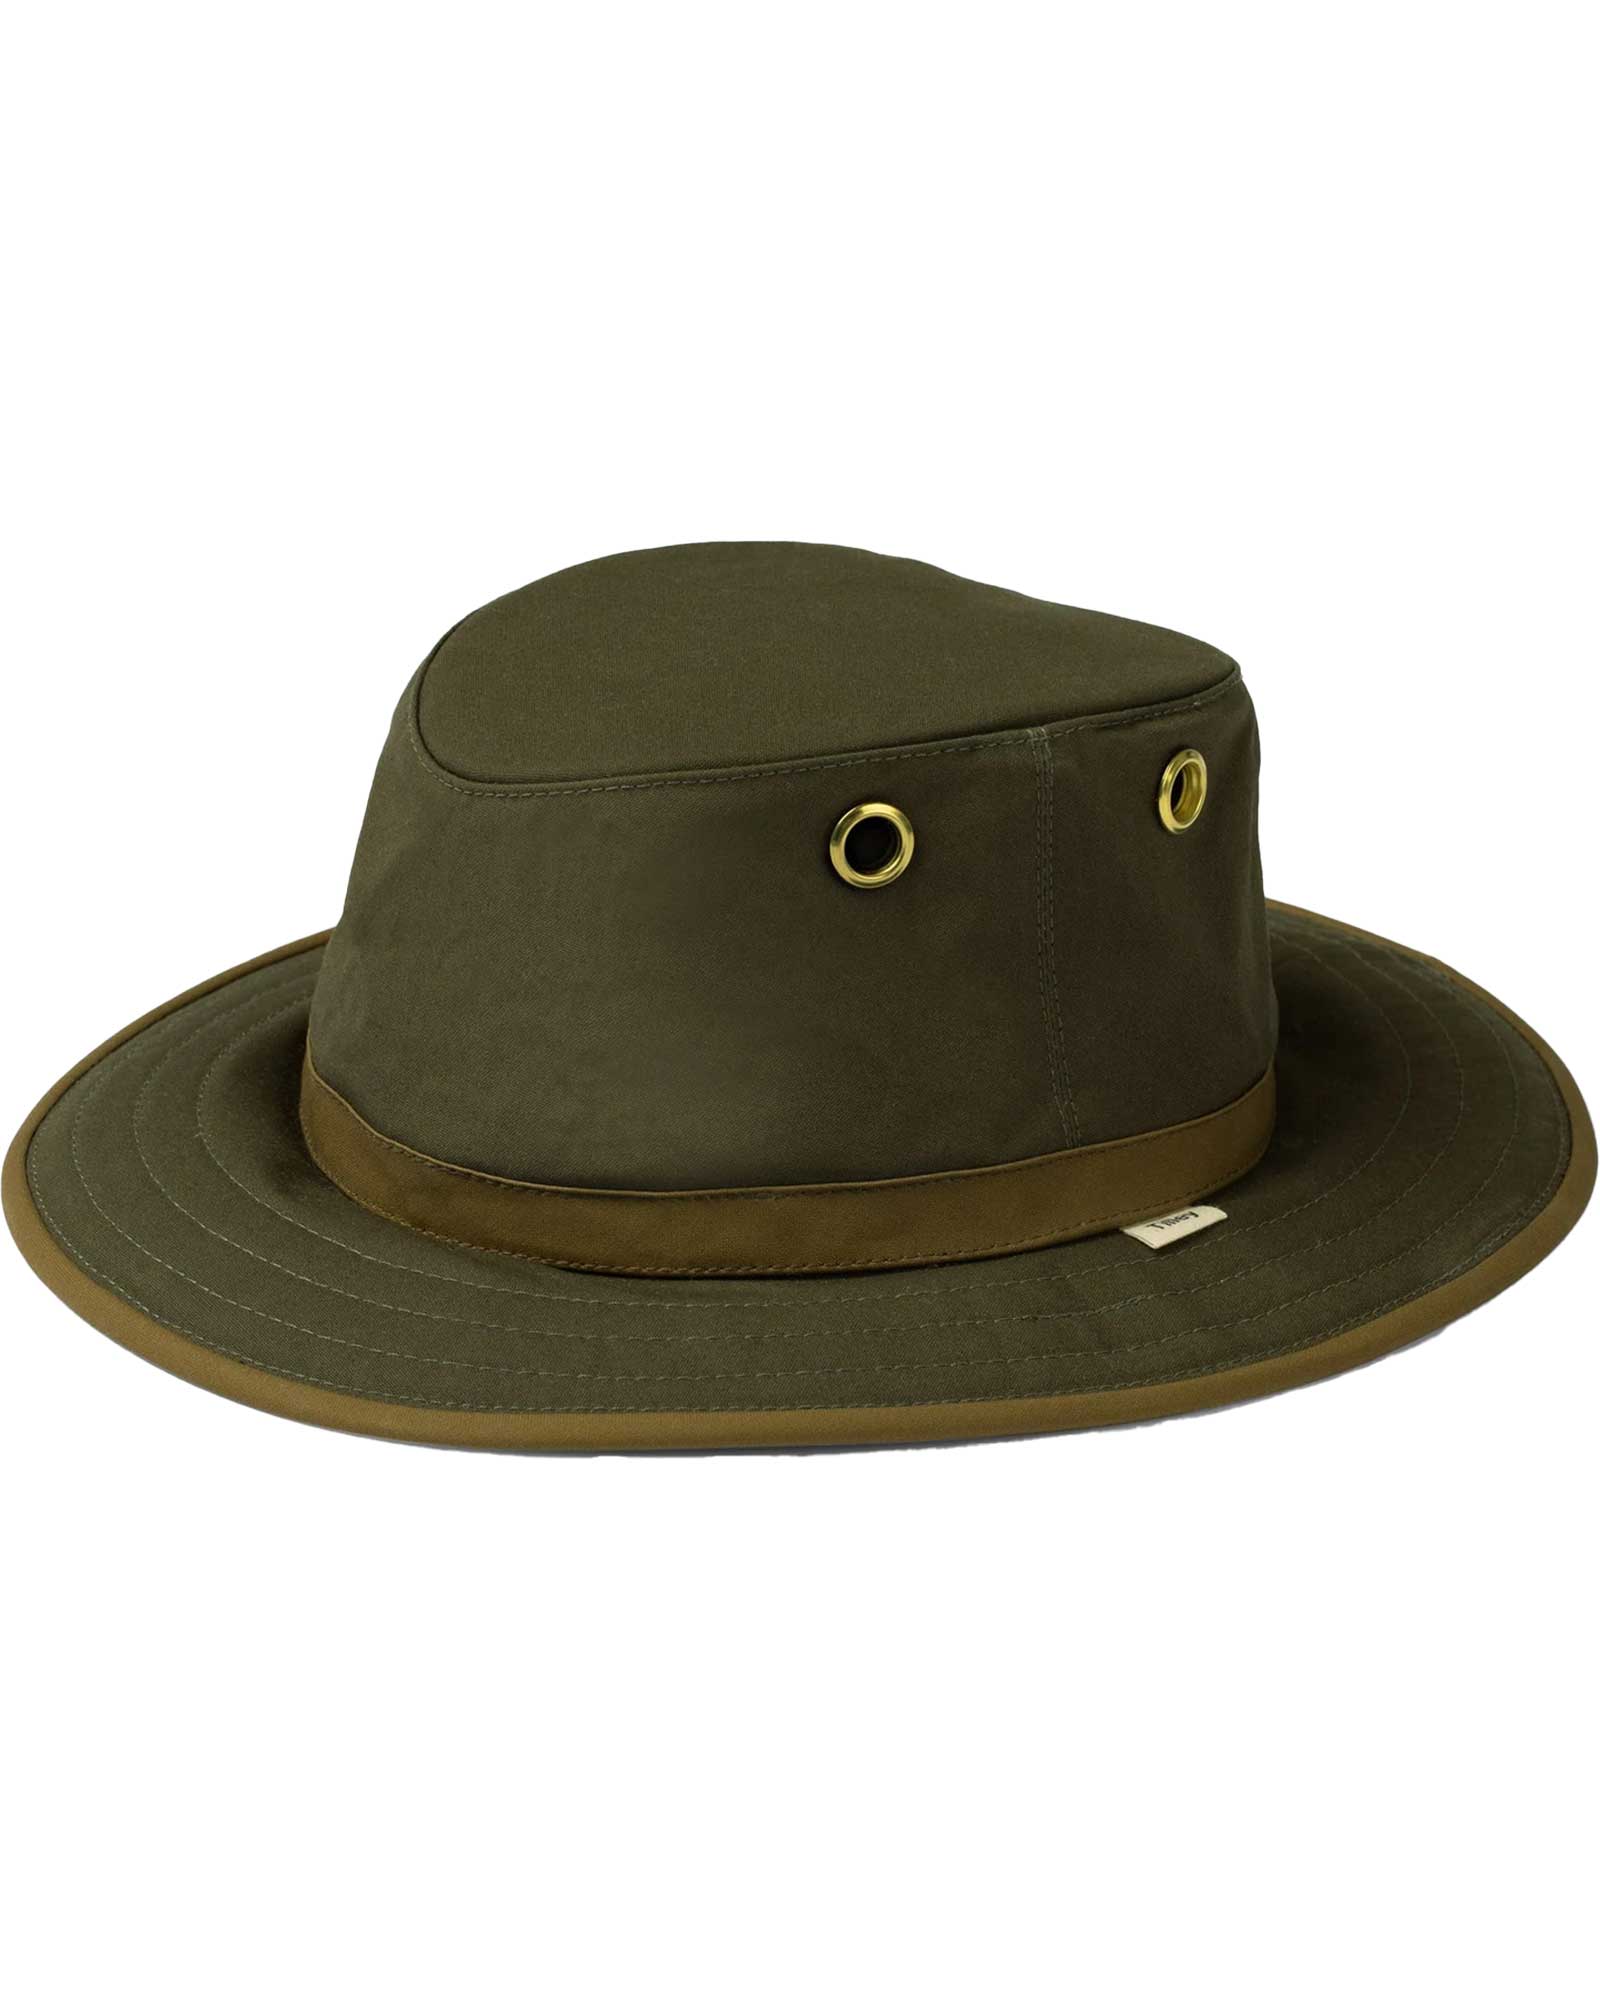 Tilley Outback Waxed Cotton Hat - Green 7 1/8